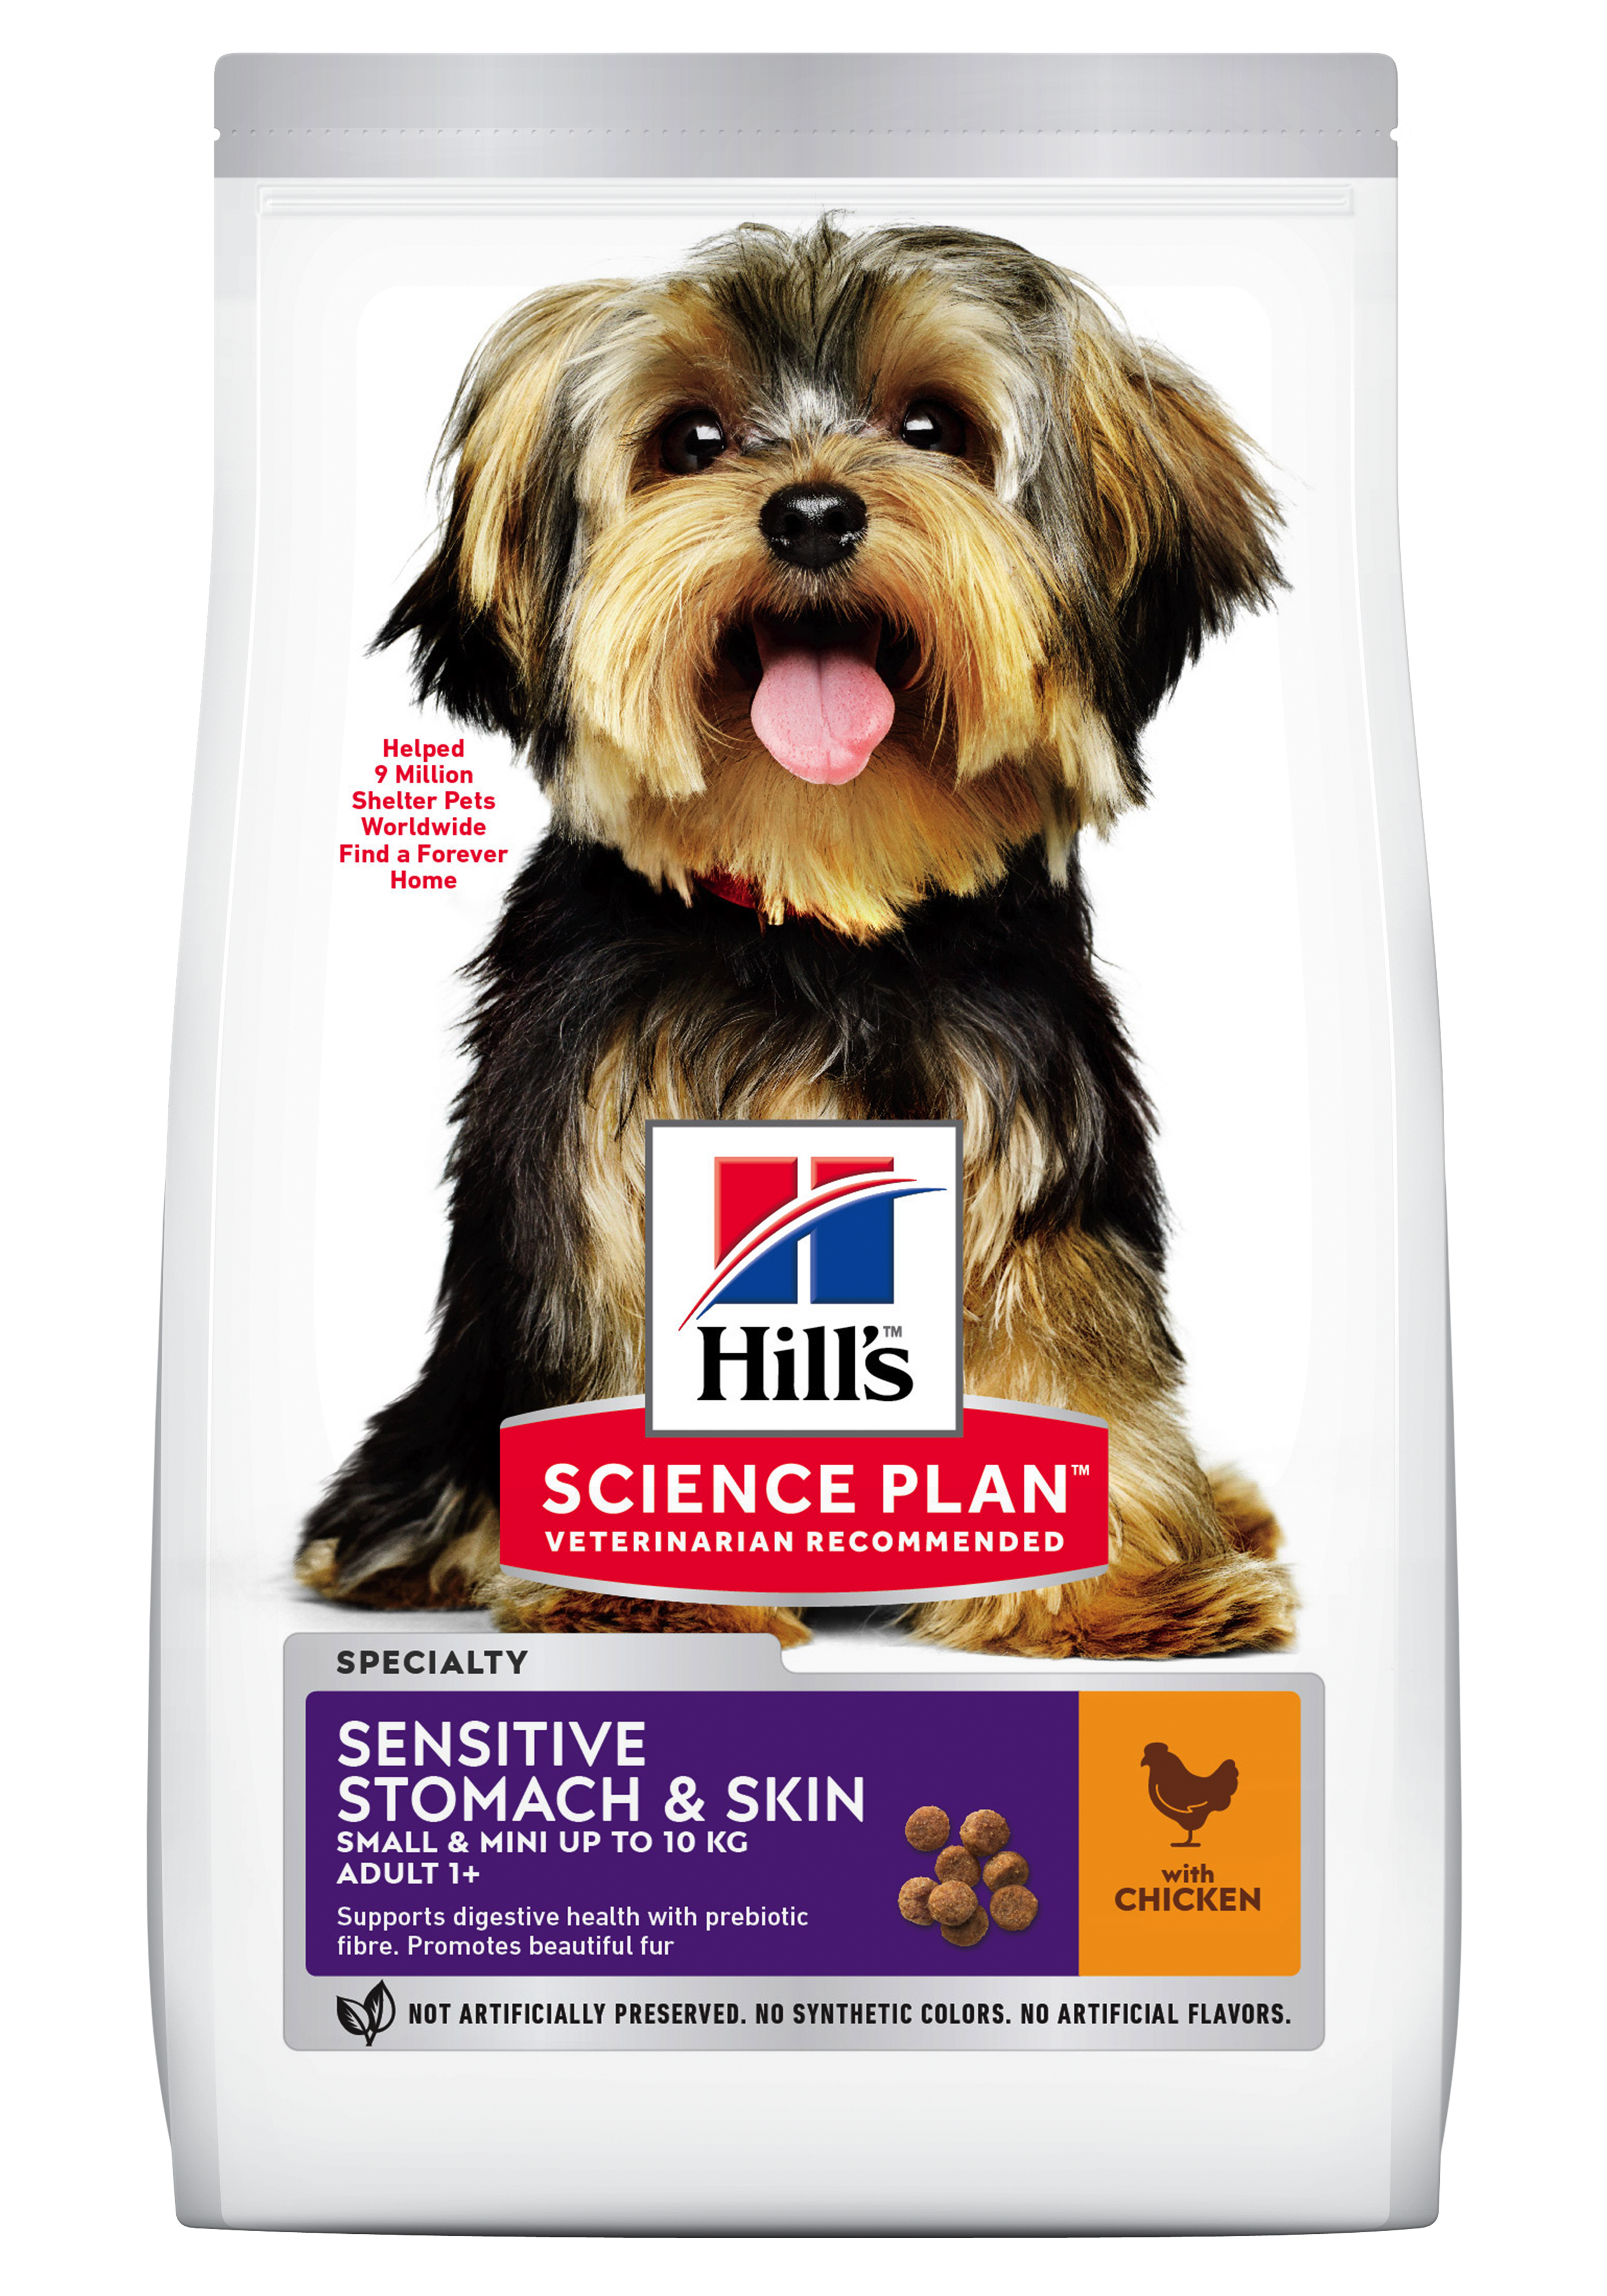 Hill’s Science Plan Canine Adult Small and Mini Sensitive Stomach and Skin Chicken, 6 kg Adult